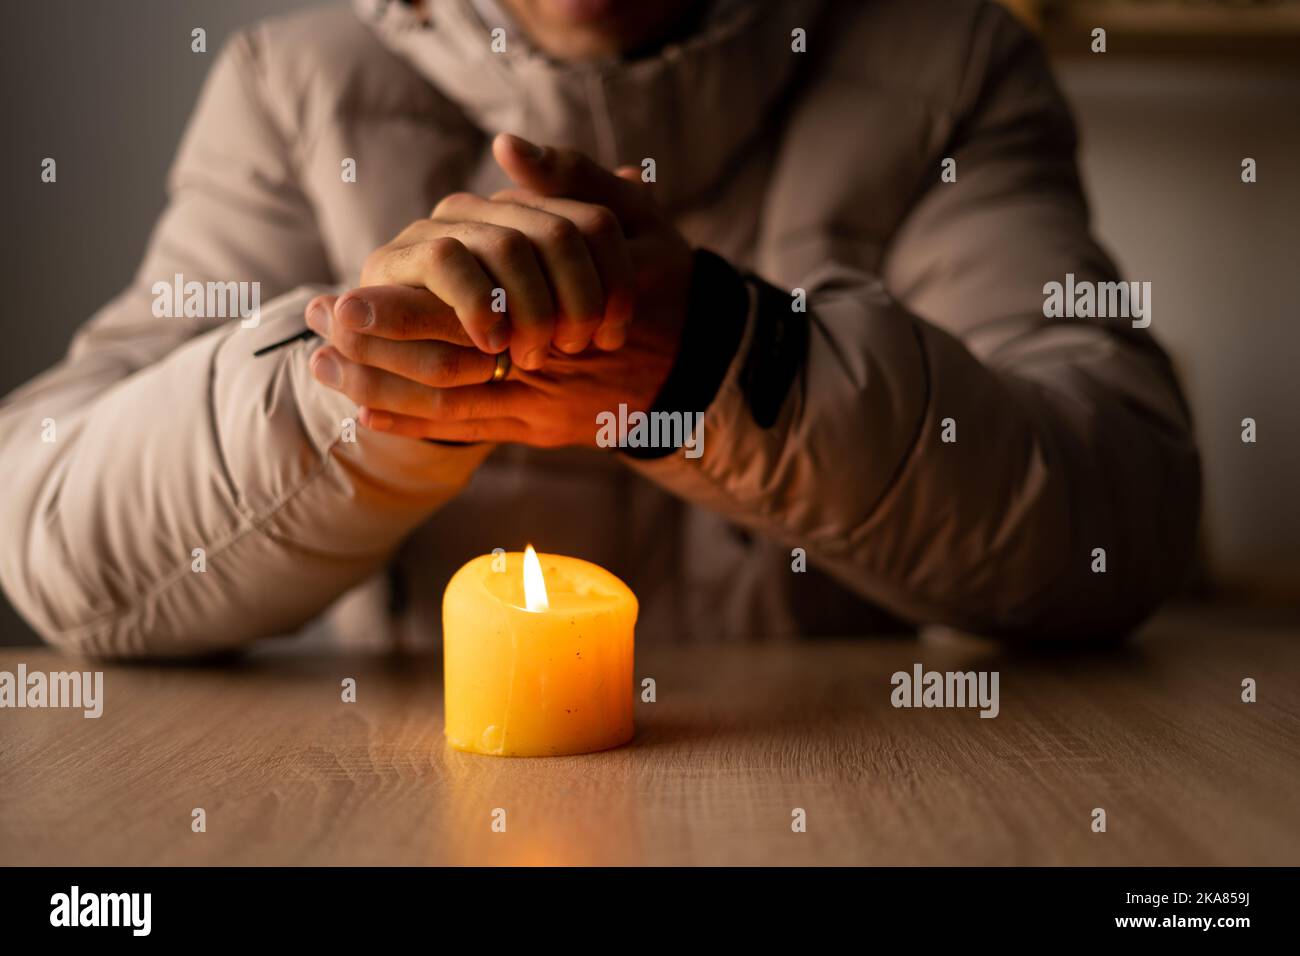 Man Holding Lit Match Near Burning Candles While Sitting In Kitchen During Power  Outage Stock Photo, Picture and Royalty Free Image. Image 194083339.